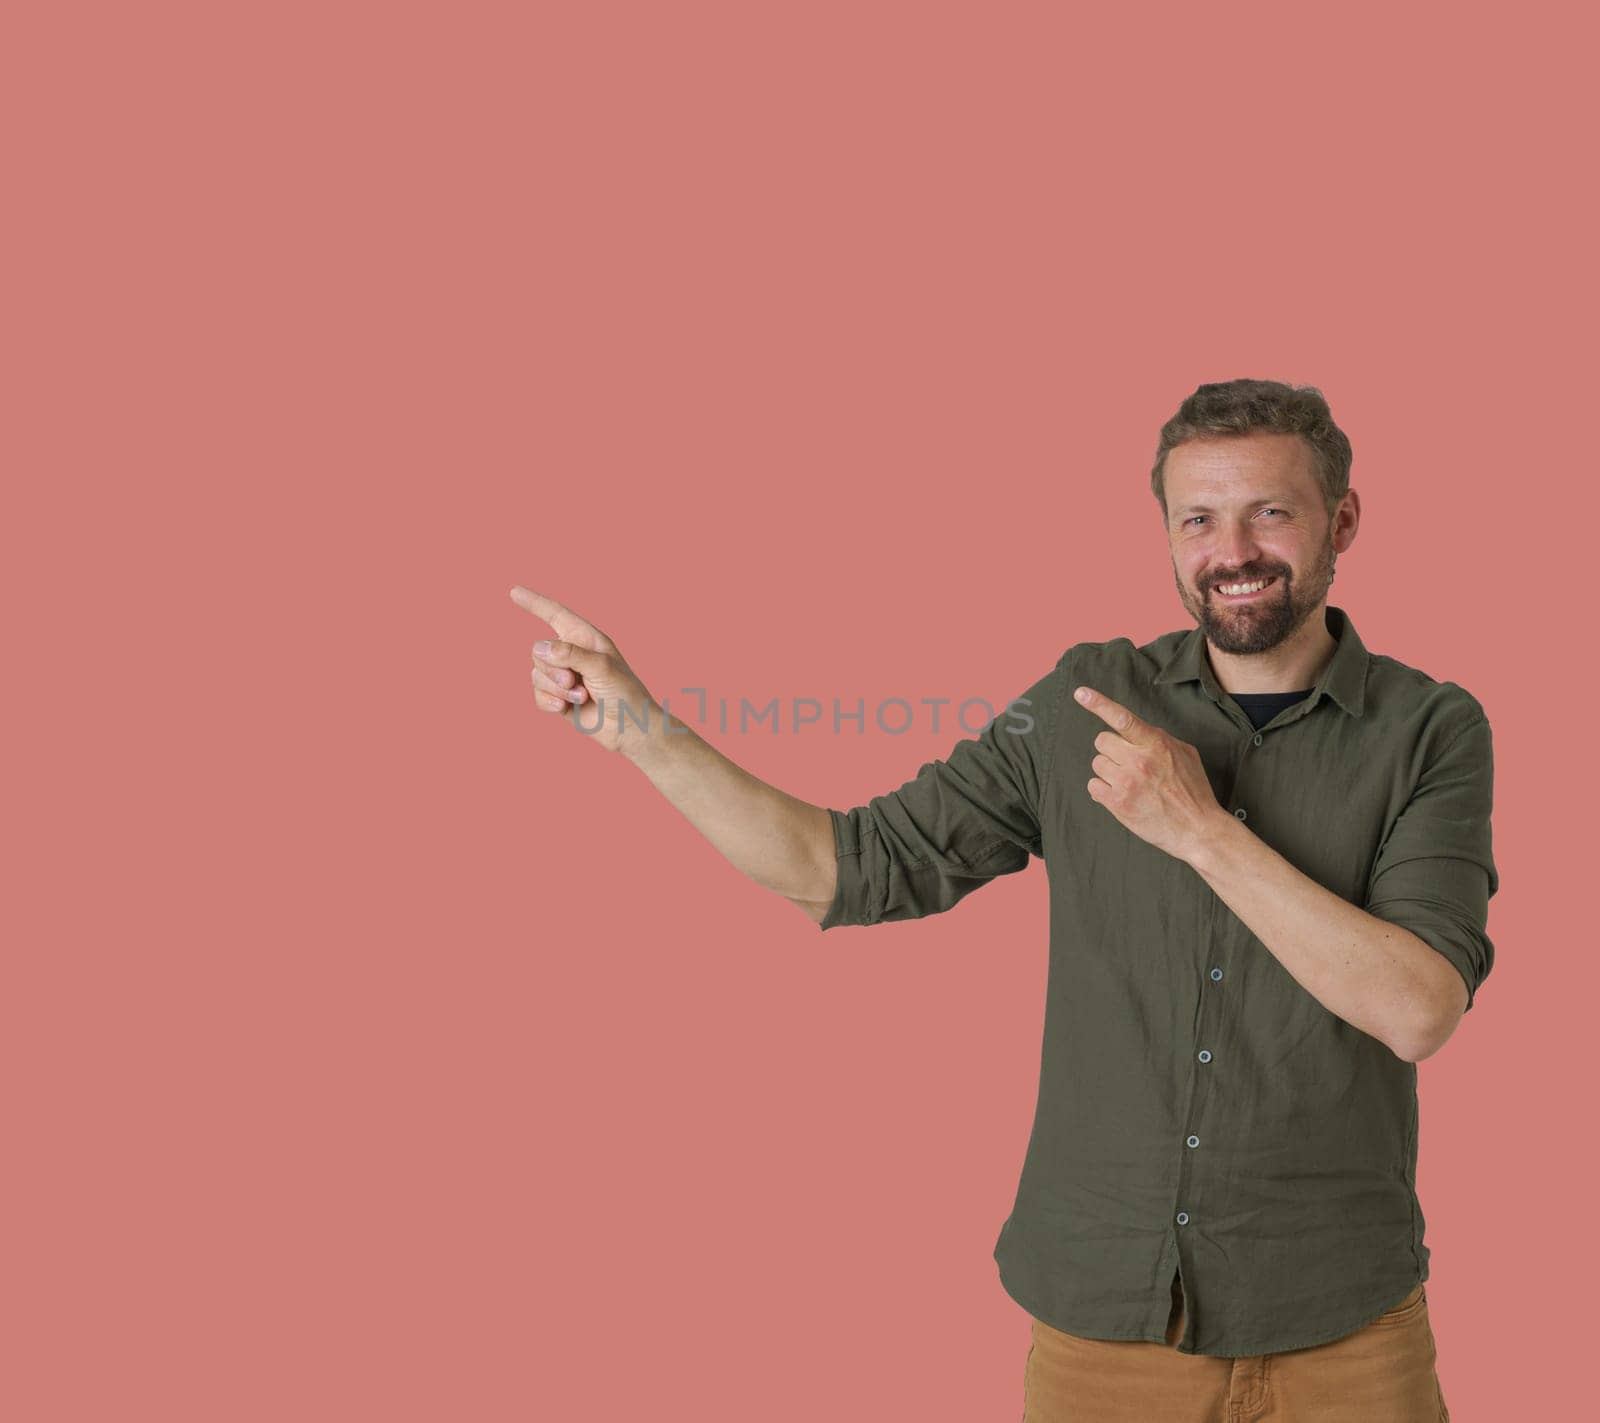 Man is depicted on a pink background, showcasing a dynamic and expressive gesture with his hands. He uses his hands to show arrows, indicating a sense of direction or movement. by LipikStockMedia